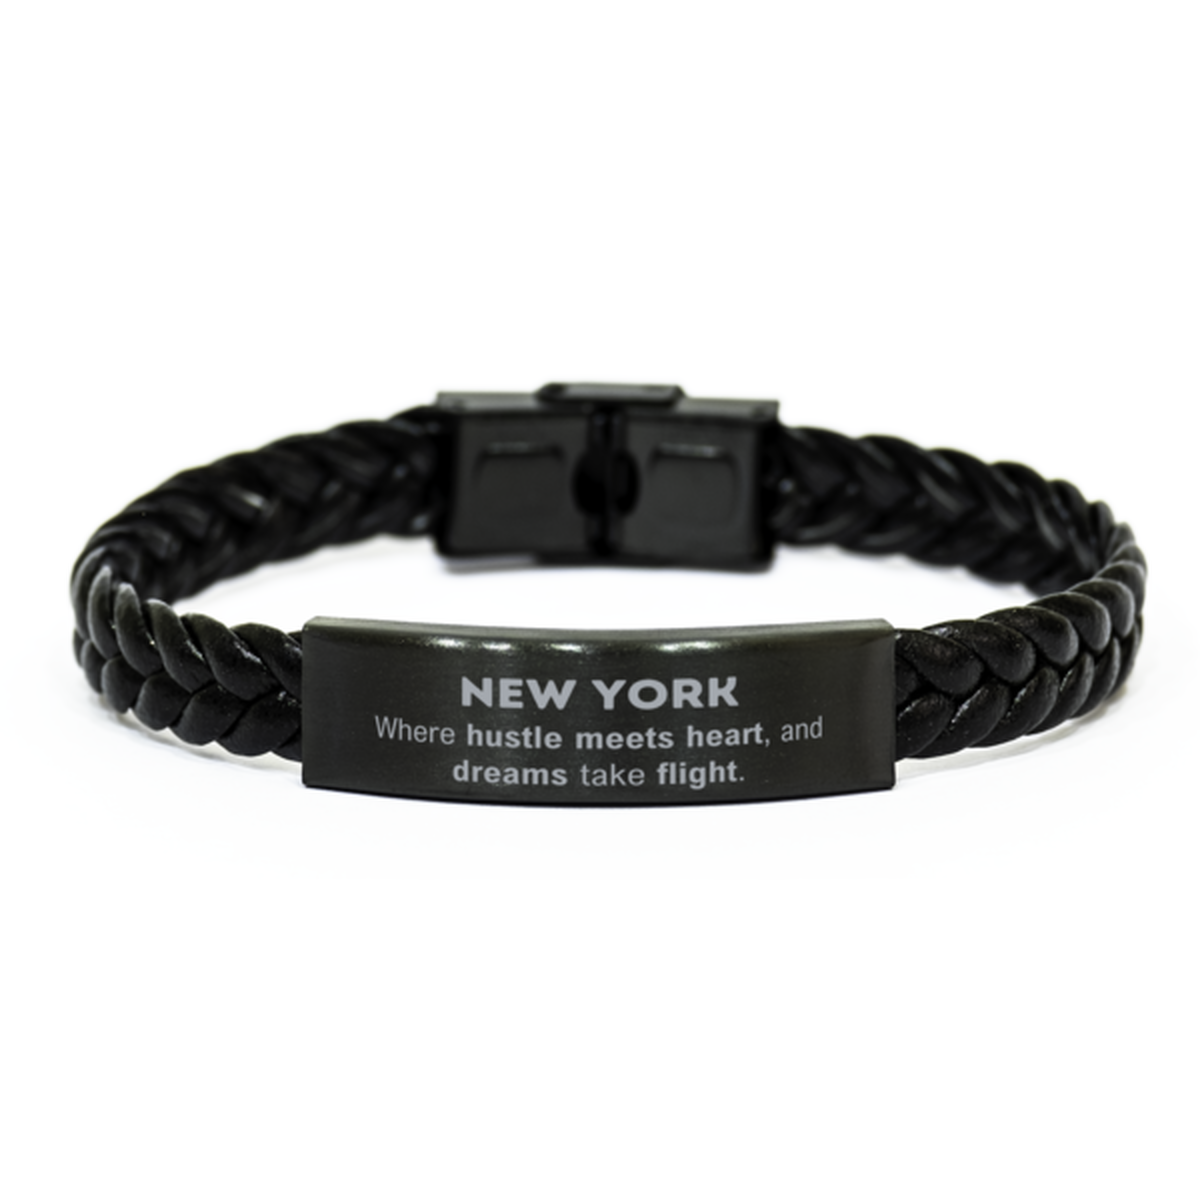 New York: Where hustle meets heart, and dreams take flight, New York Gifts, Proud New York Christmas Birthday New York Braided Leather Bracelet, New York State People, Men, Women, Friends